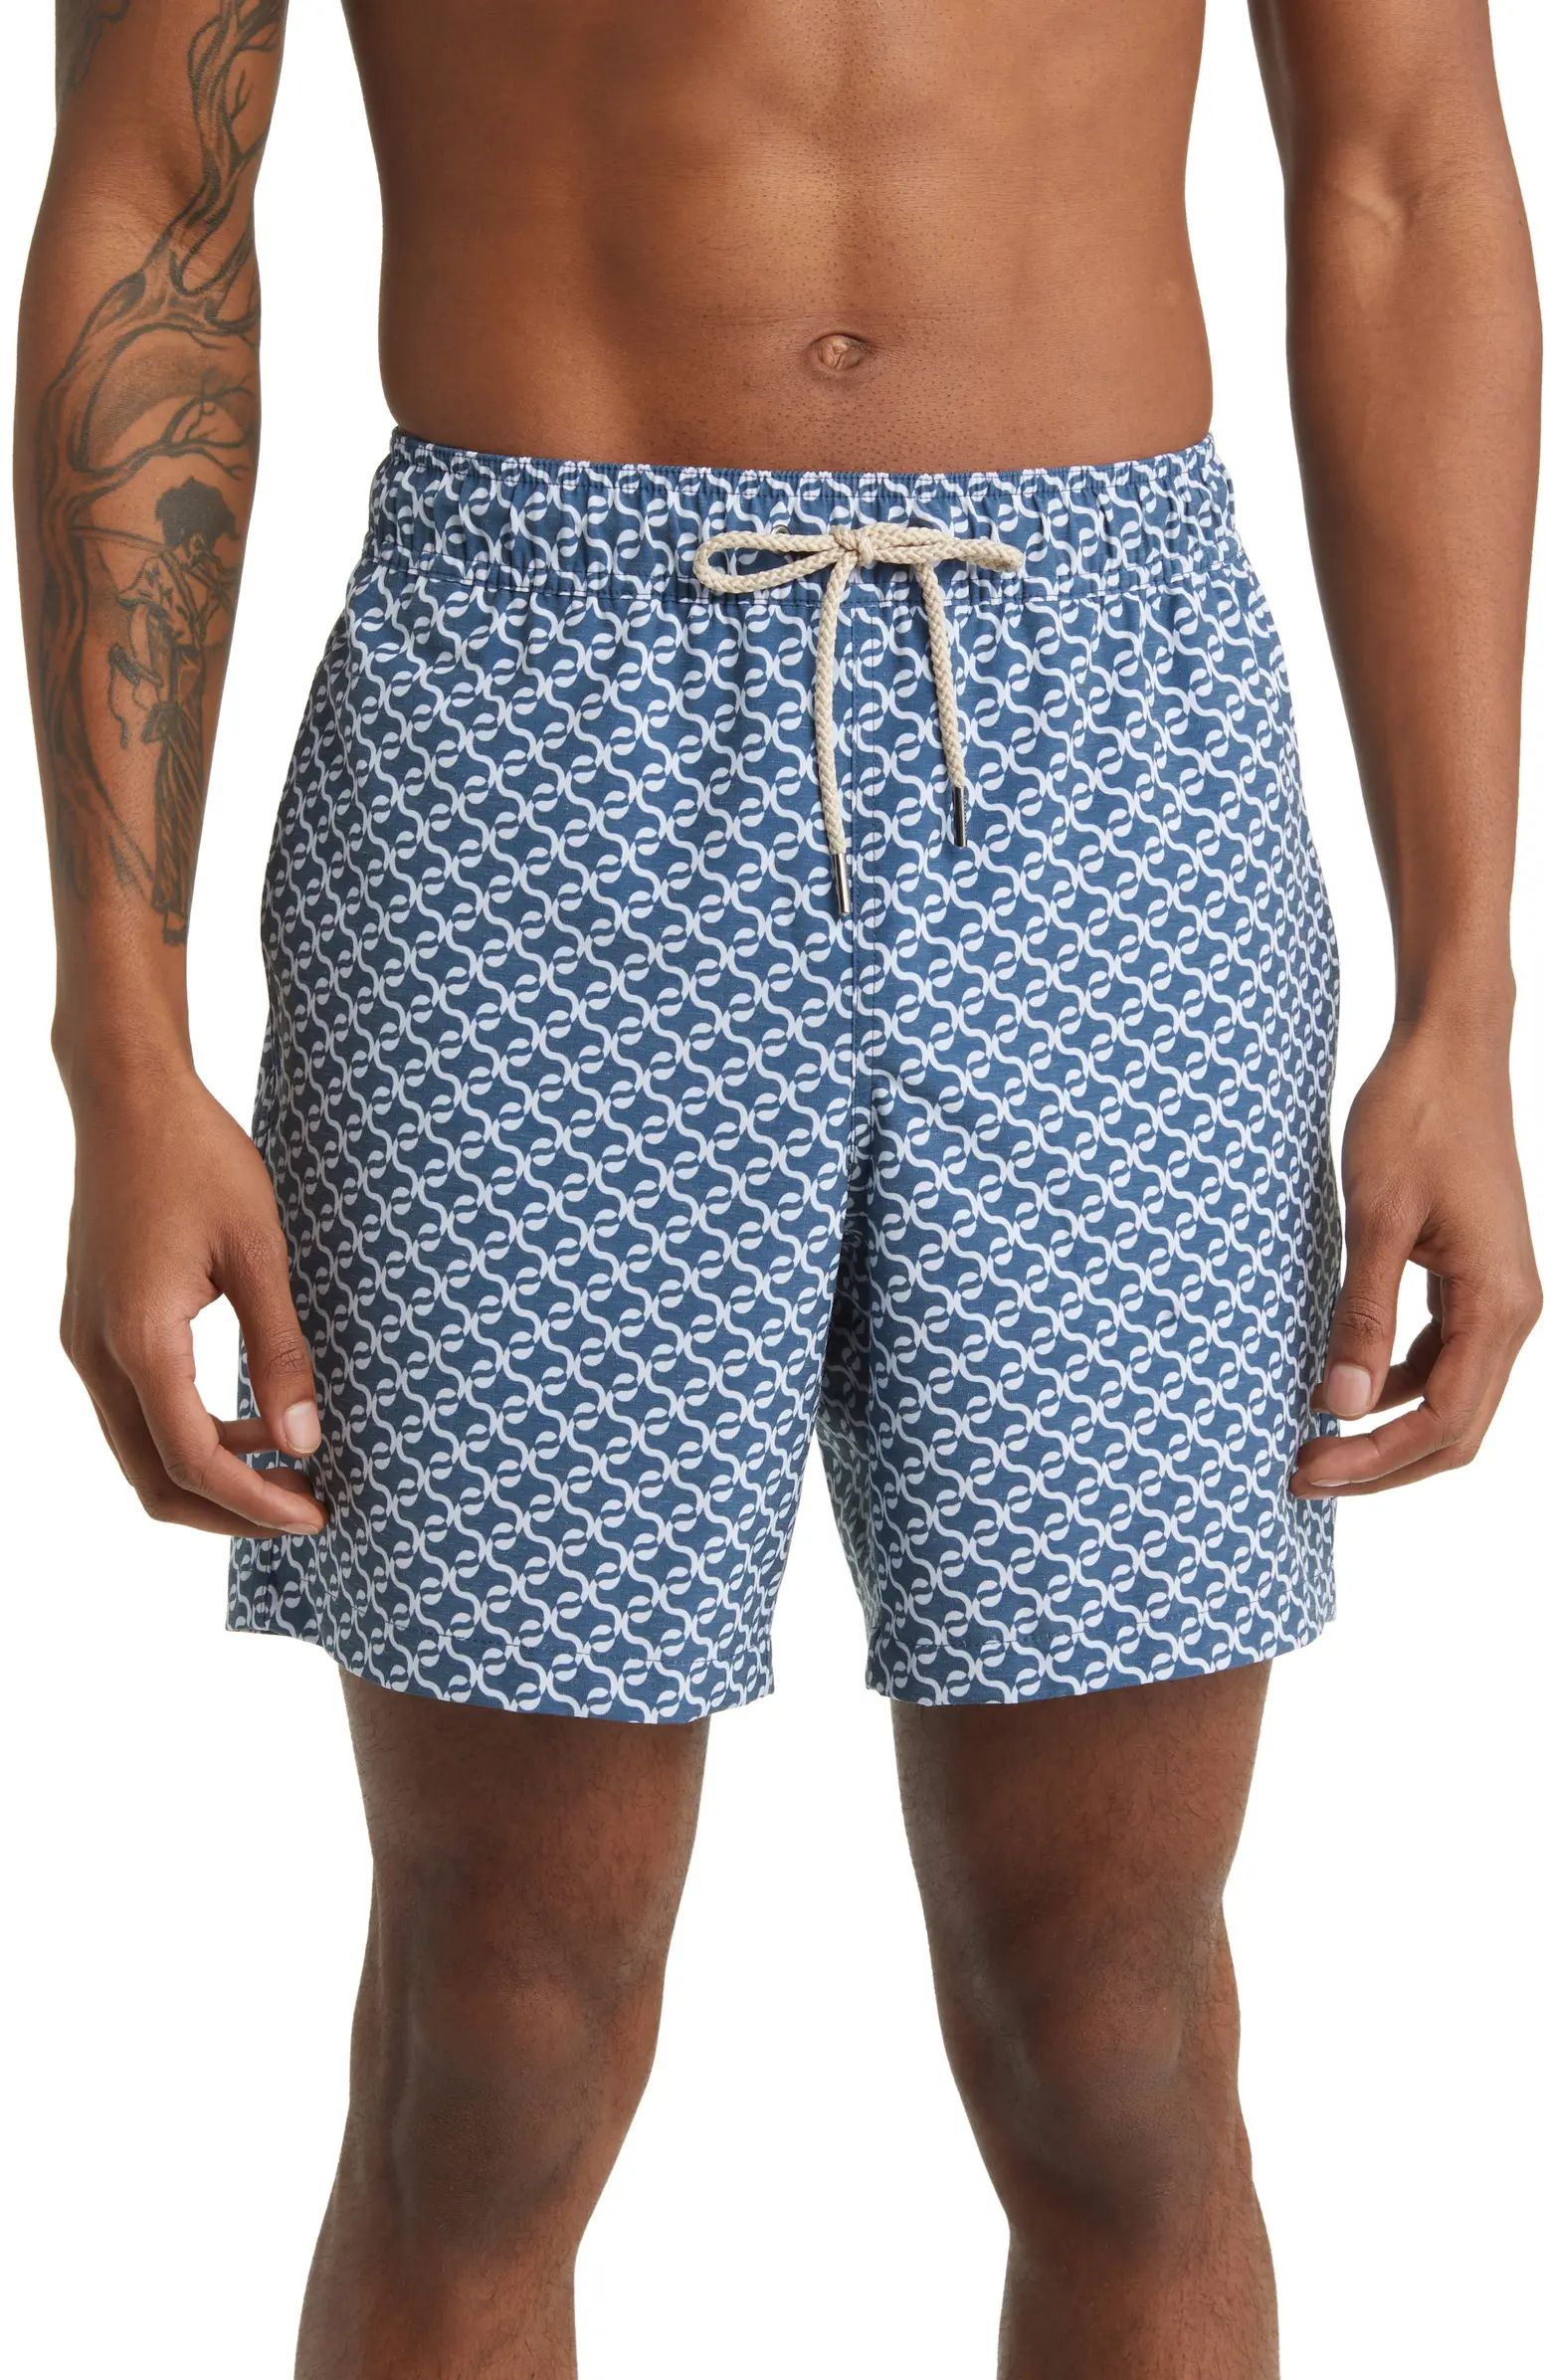 The Bayberry Swim Trunks | Nordstrom